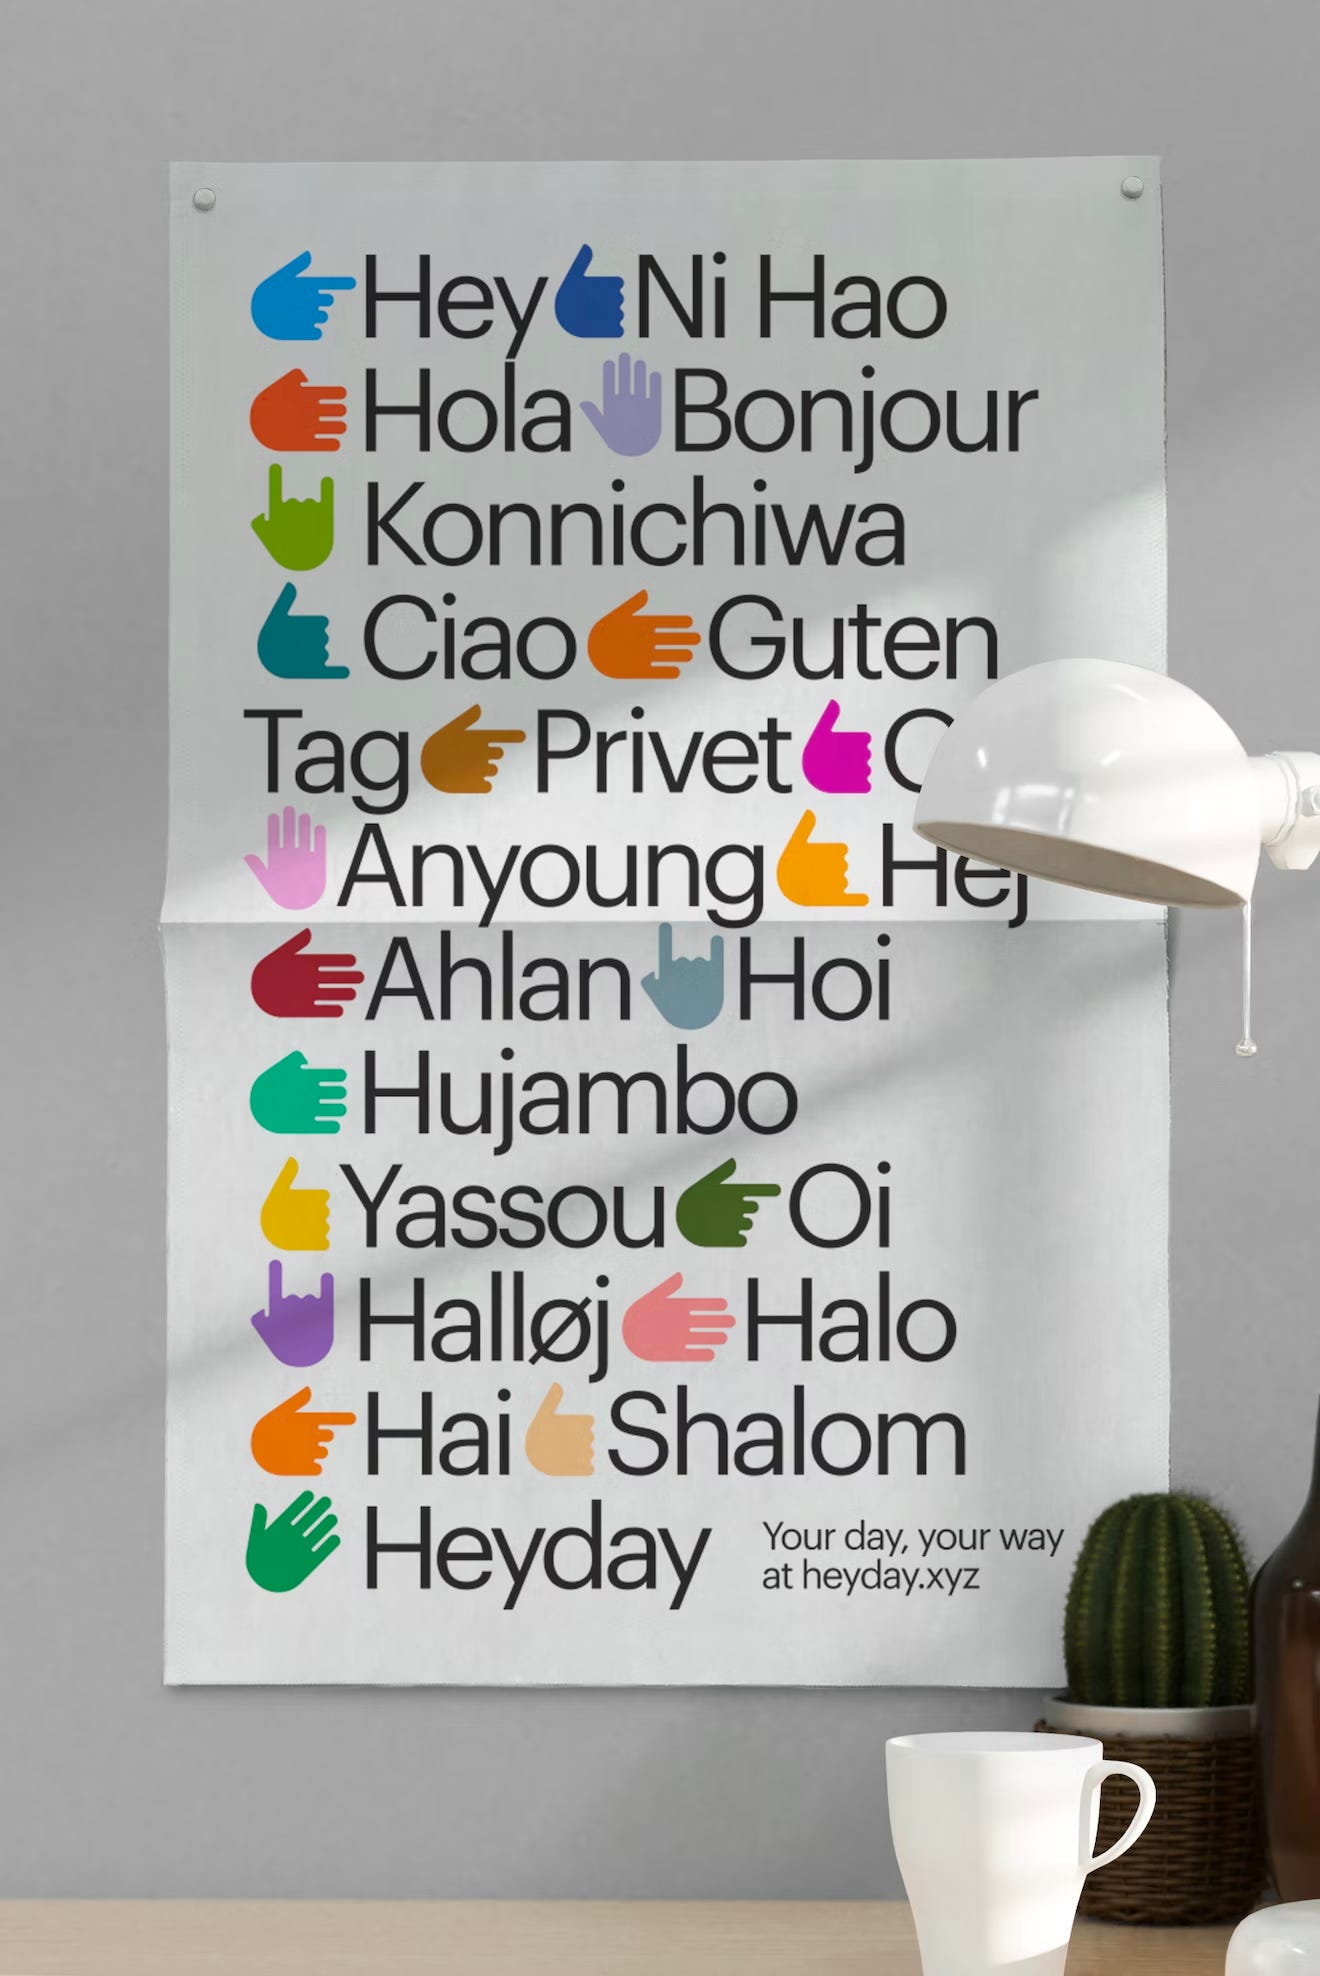 Heyday hand gestures with greetings from 20+ different languages - i.e. Hey, Hola, Ciao, Privet...